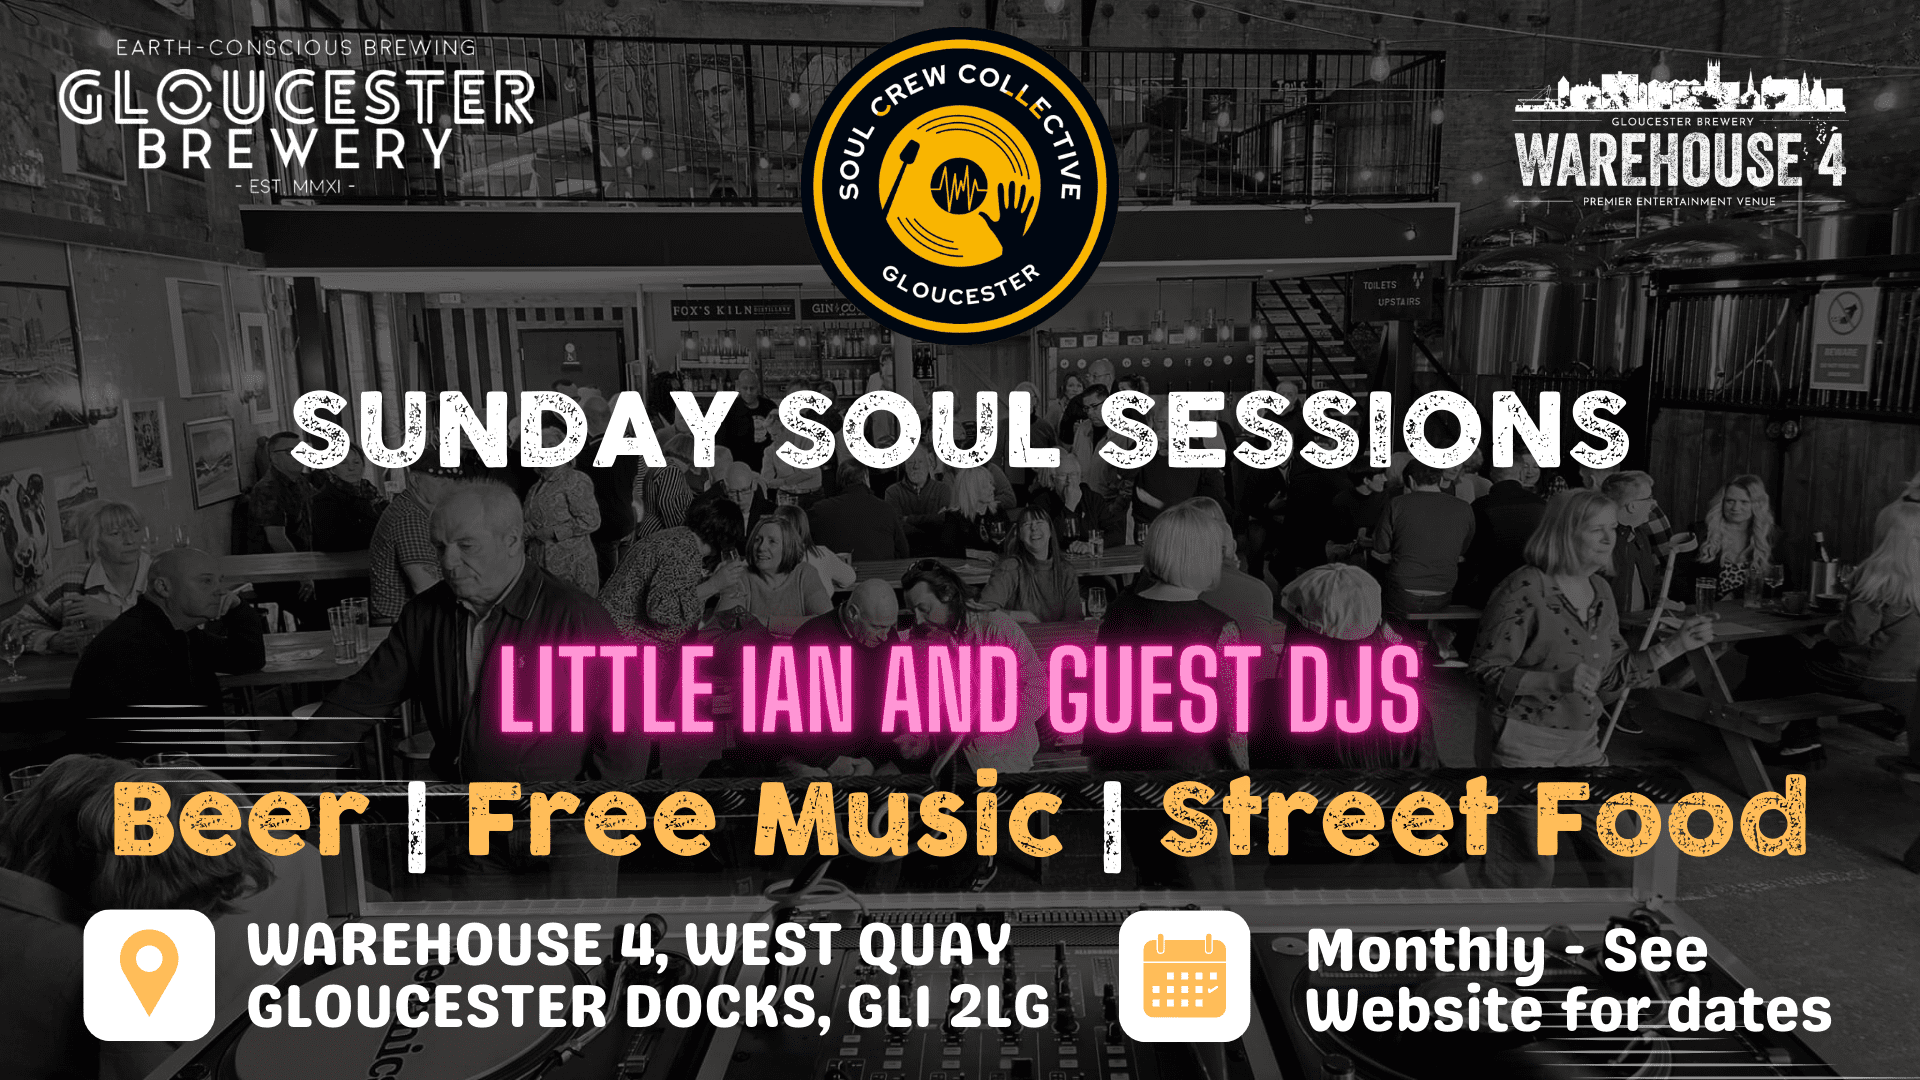 Sunday Soul Sessions with Little Ian and guest DJs each month in Warehouse 4